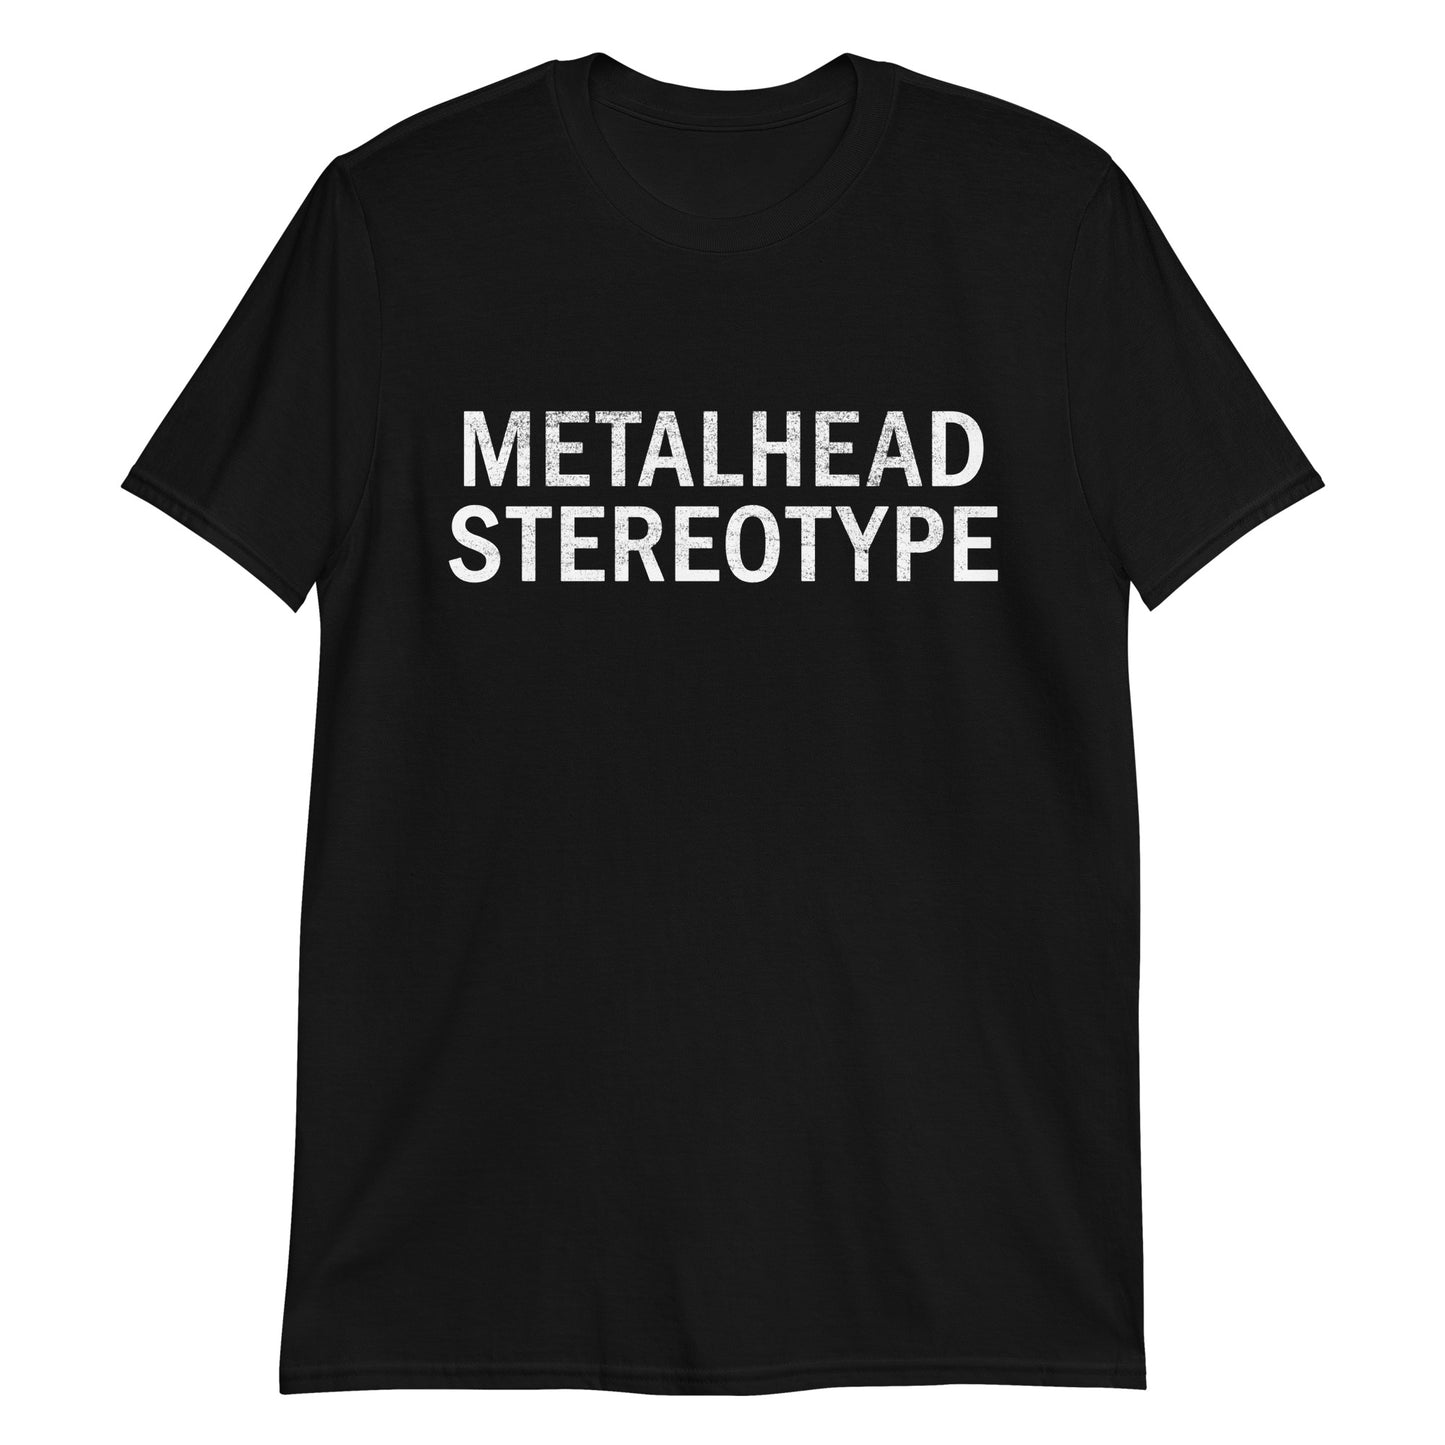 OPAL IN SKY "Metalhead Stereotype" Front Unisex T-Shirt